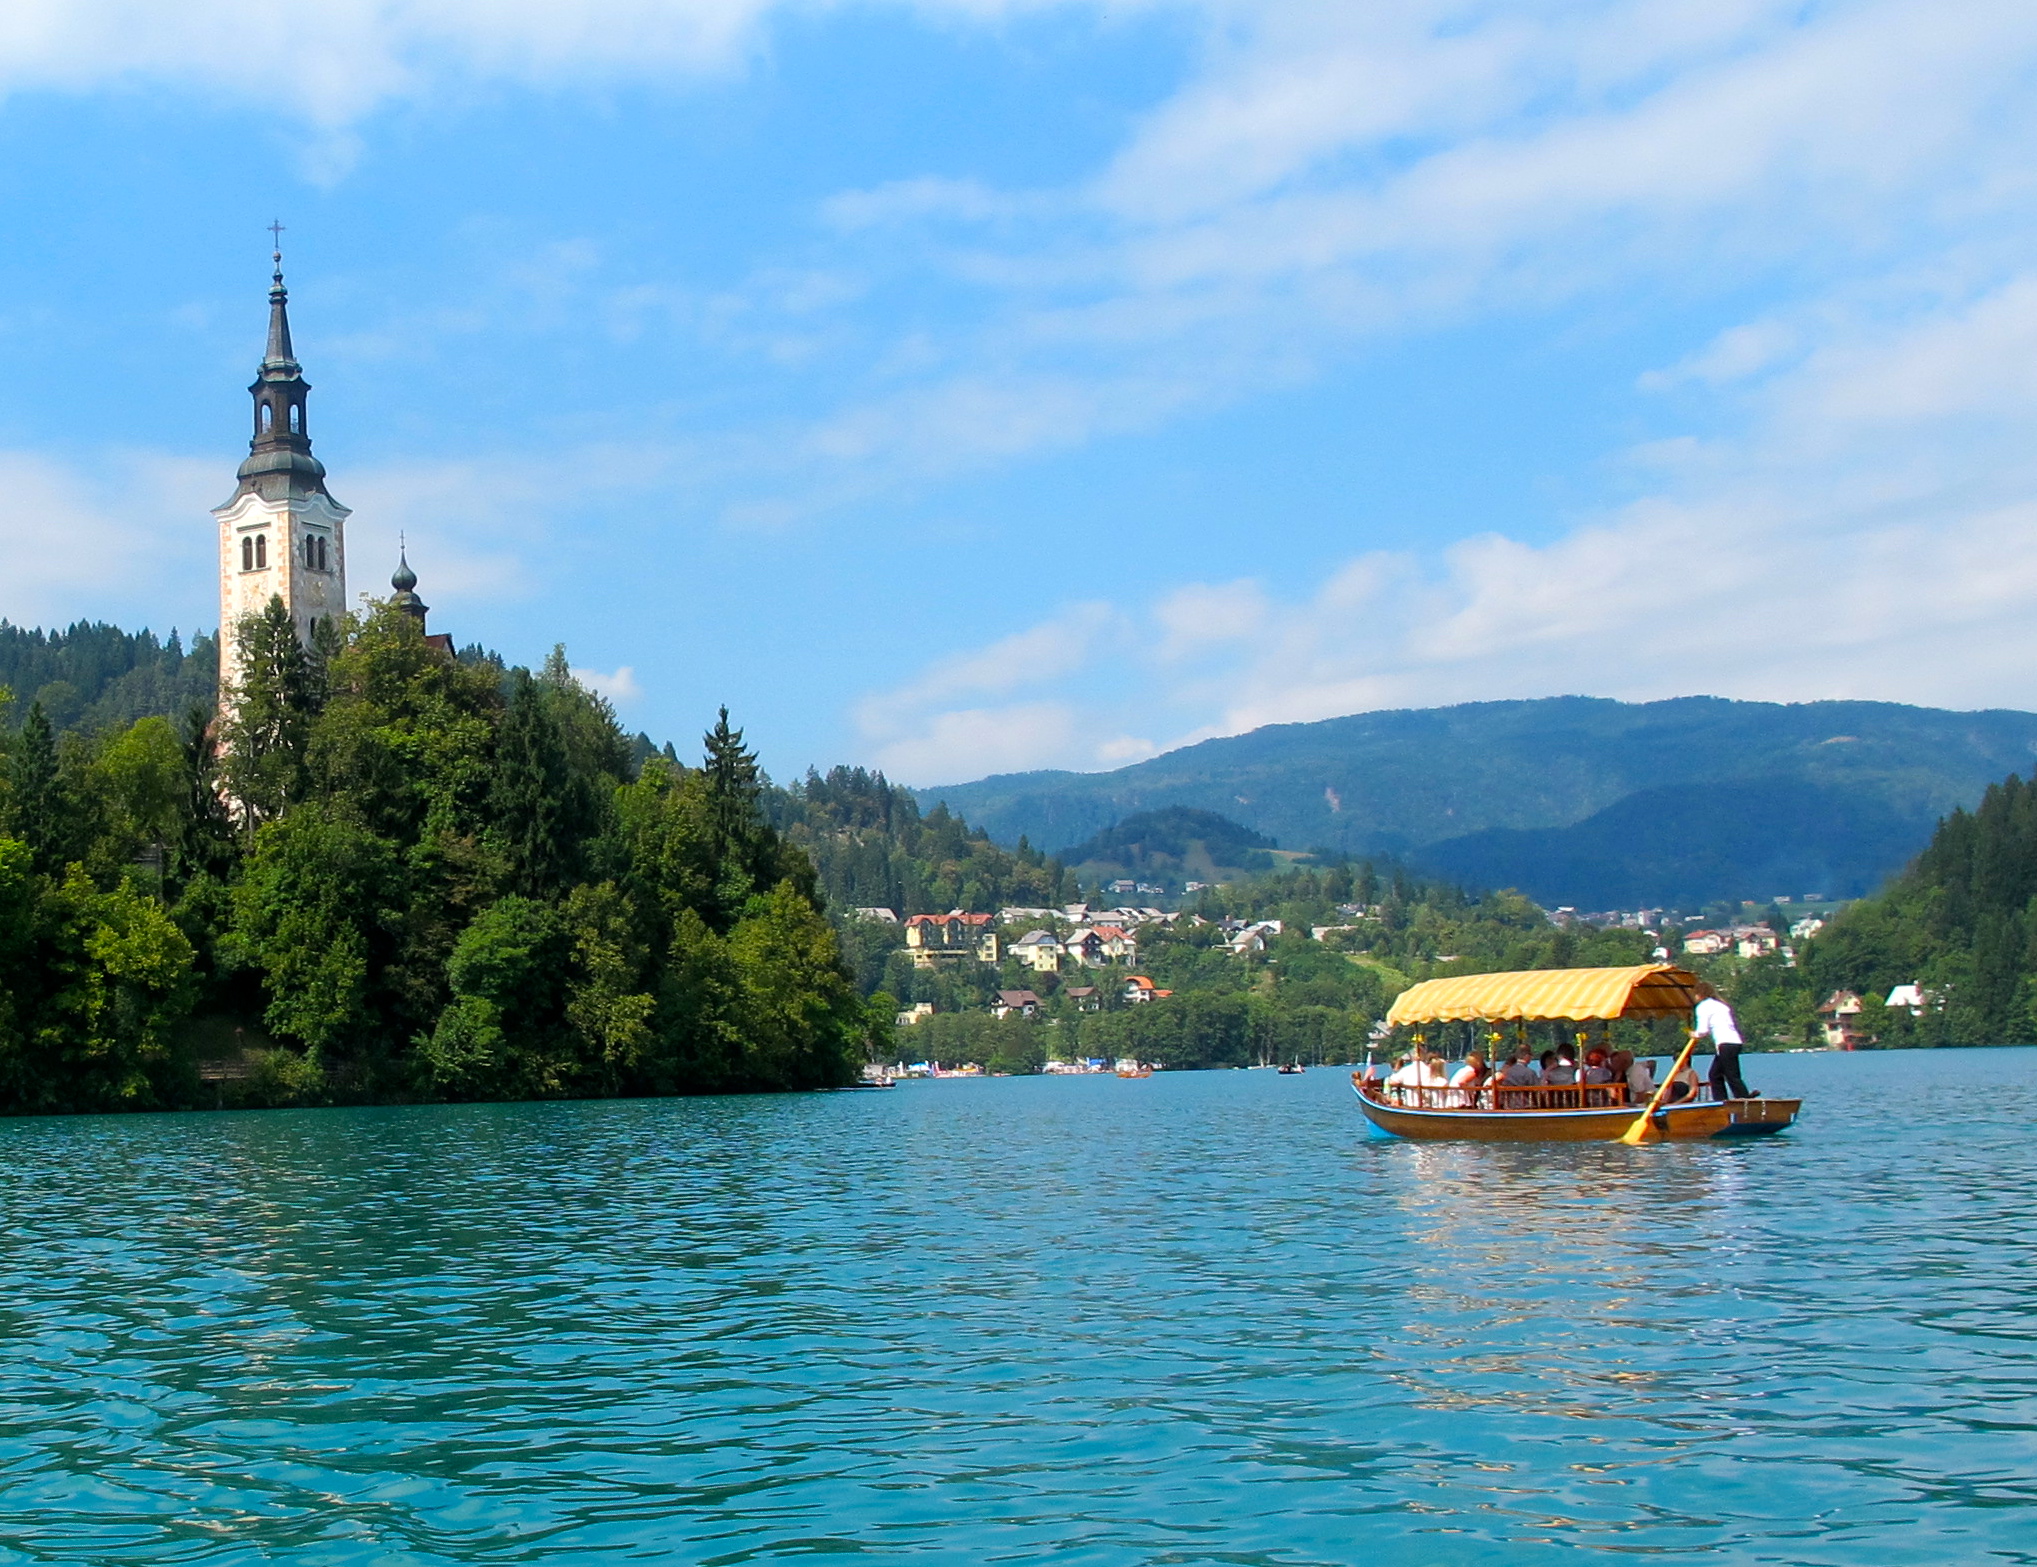 The lovely Baroque Church of the Assumption sits in the middle of Lake Bled, where only only row boats and pletna - wooden boats, similar to Venetian gondolas - are permitted.